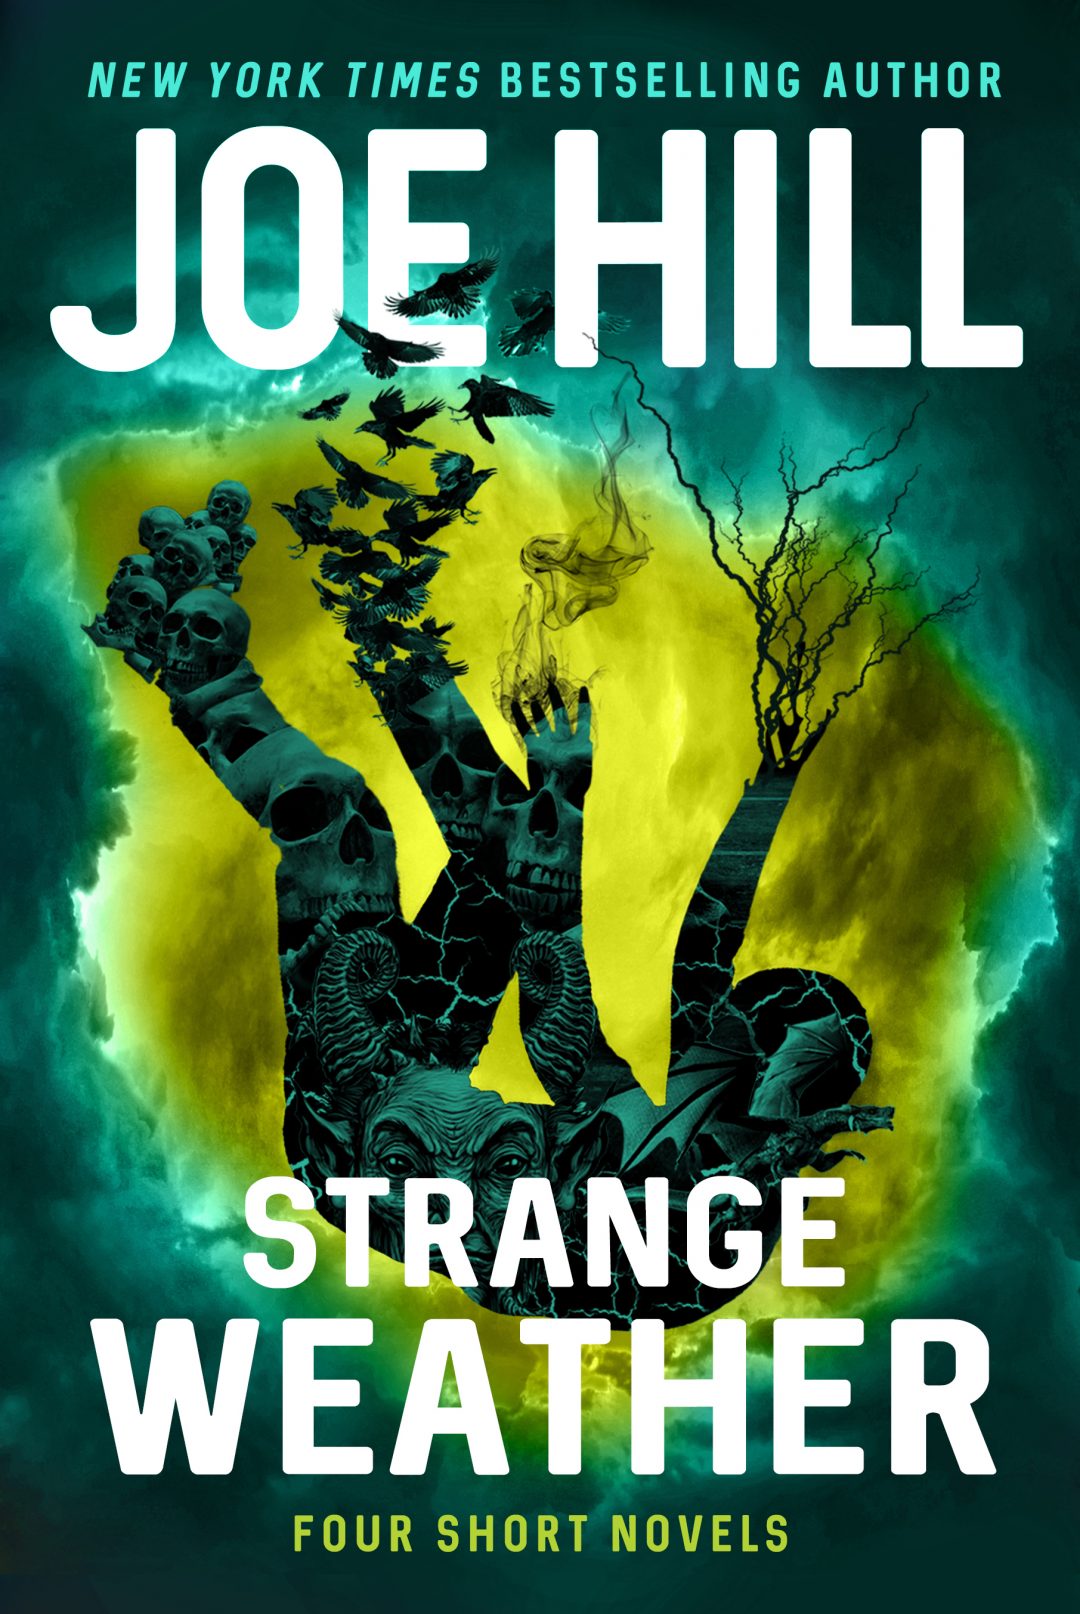 the strange book review